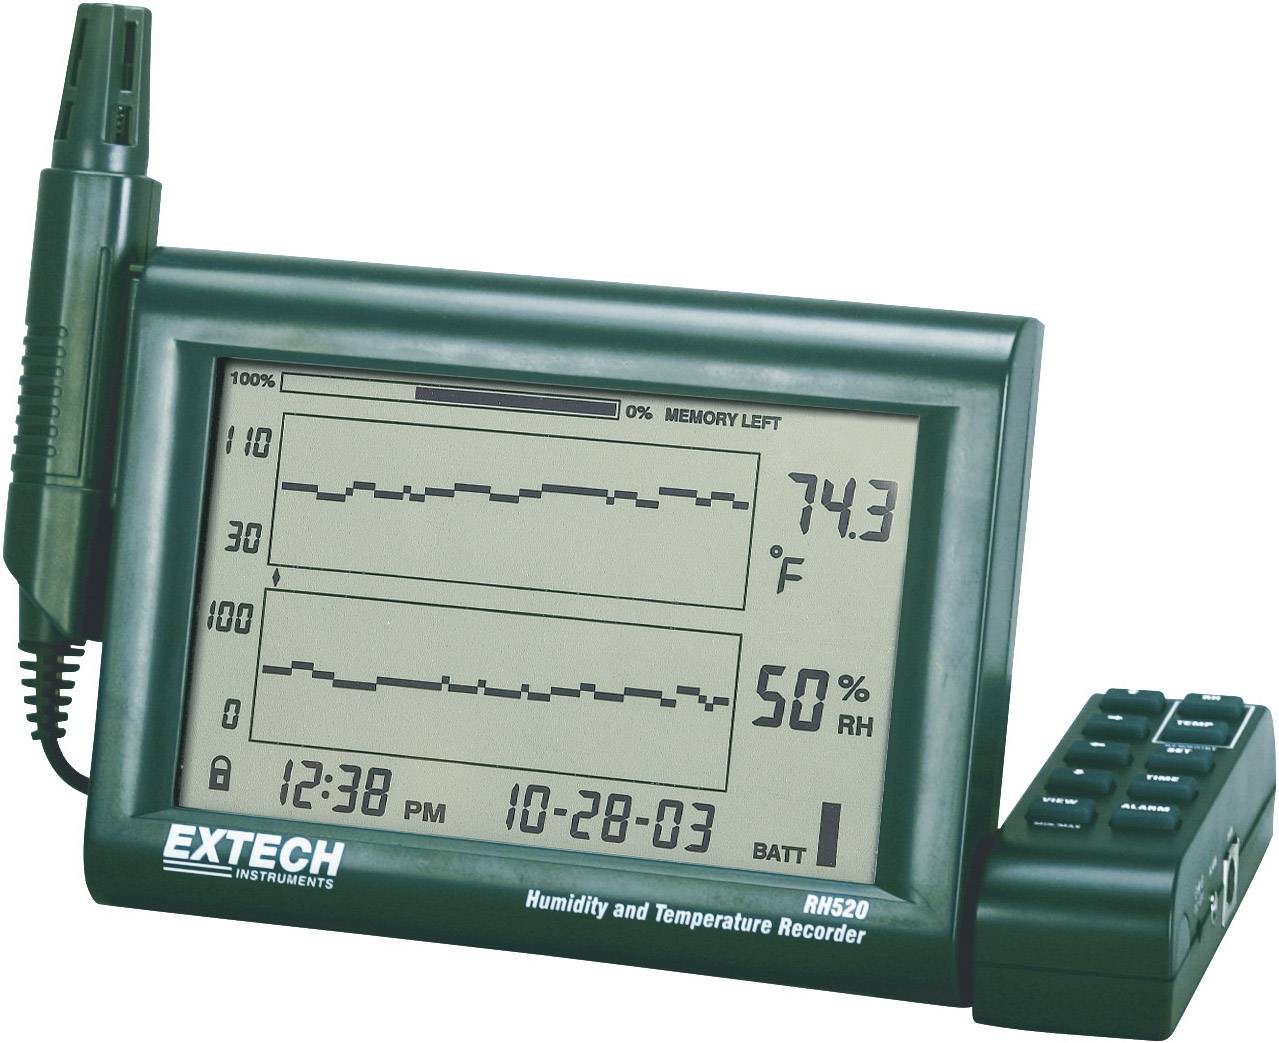 extech thermo hygrometer